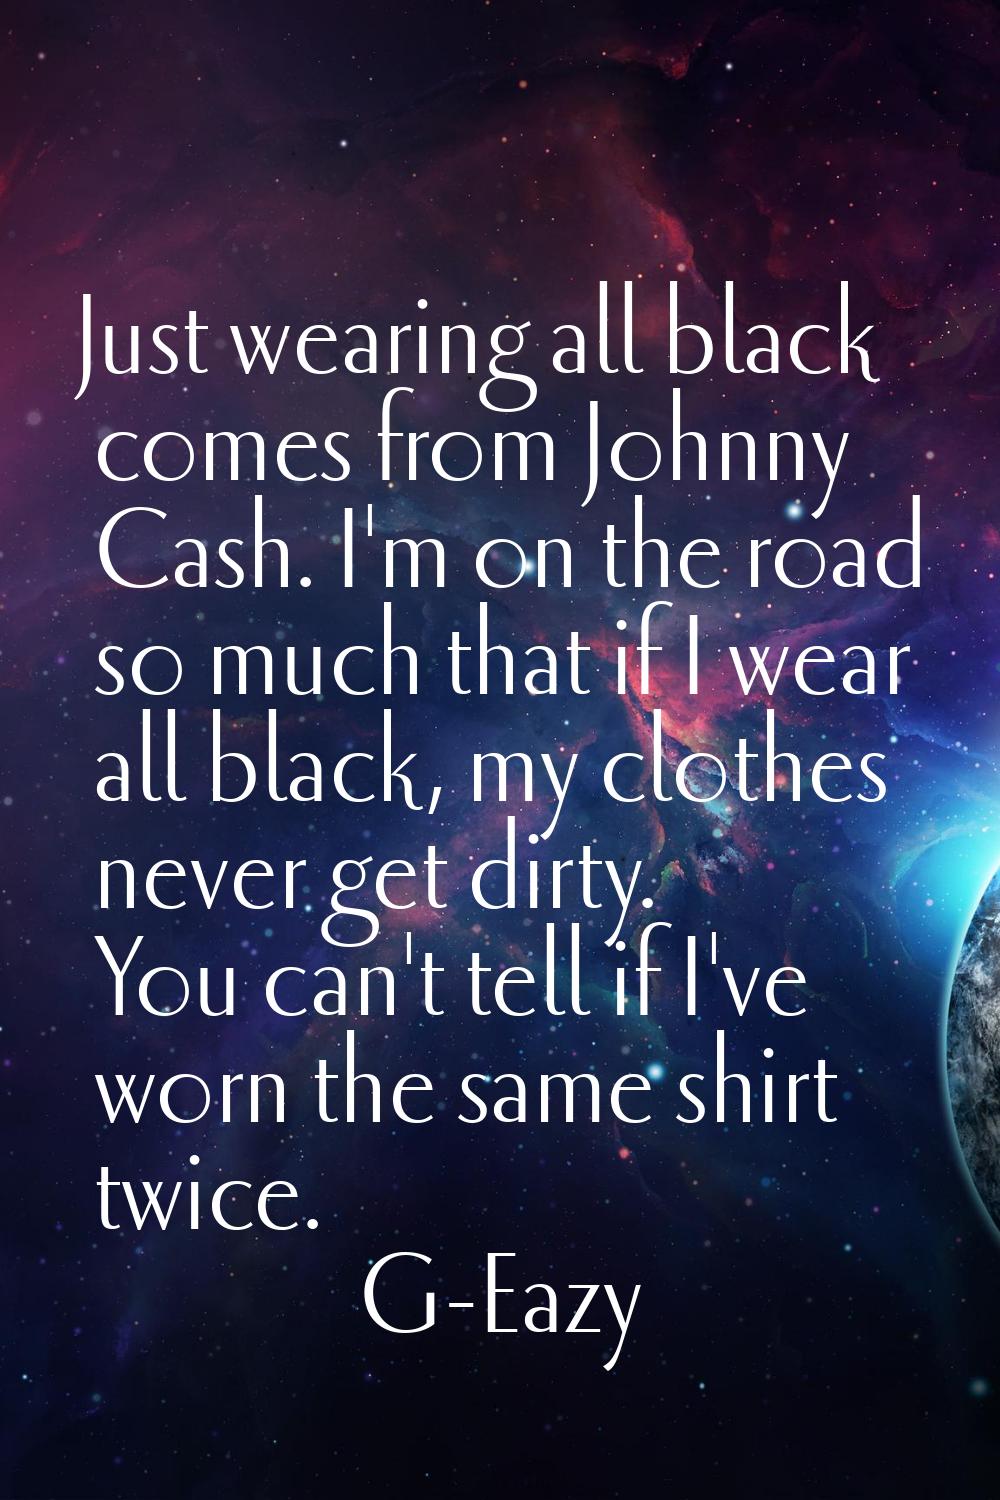 Just wearing all black comes from Johnny Cash. I'm on the road so much that if I wear all black, my